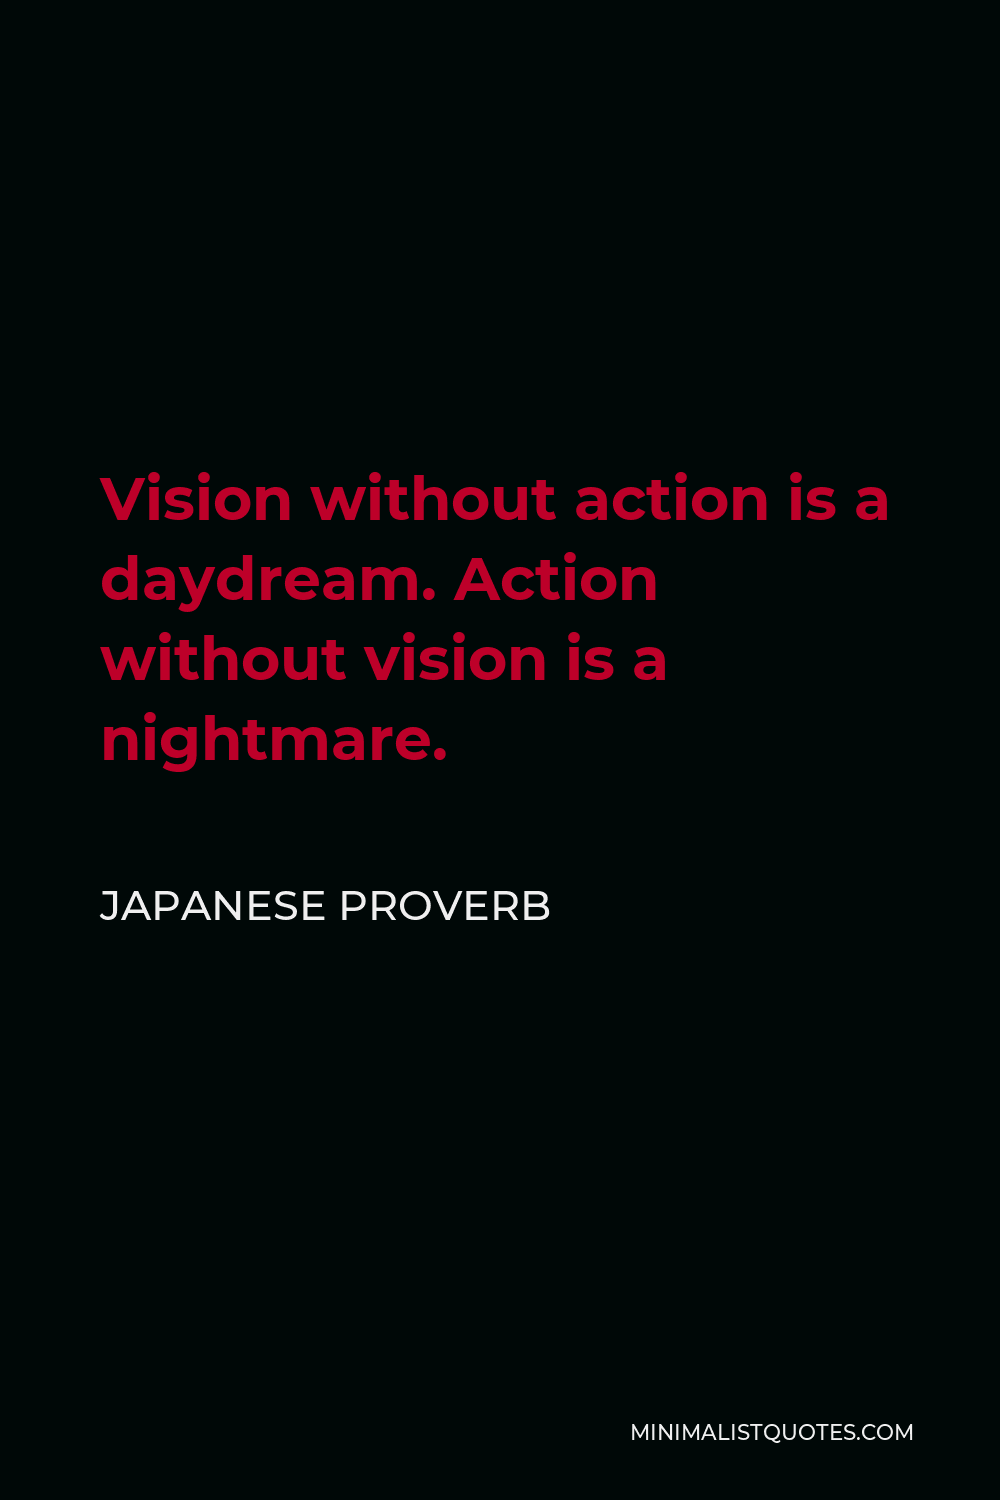 Japanese Proverb Quote - Vision without action is a daydream. Action without vision is a nightmare.